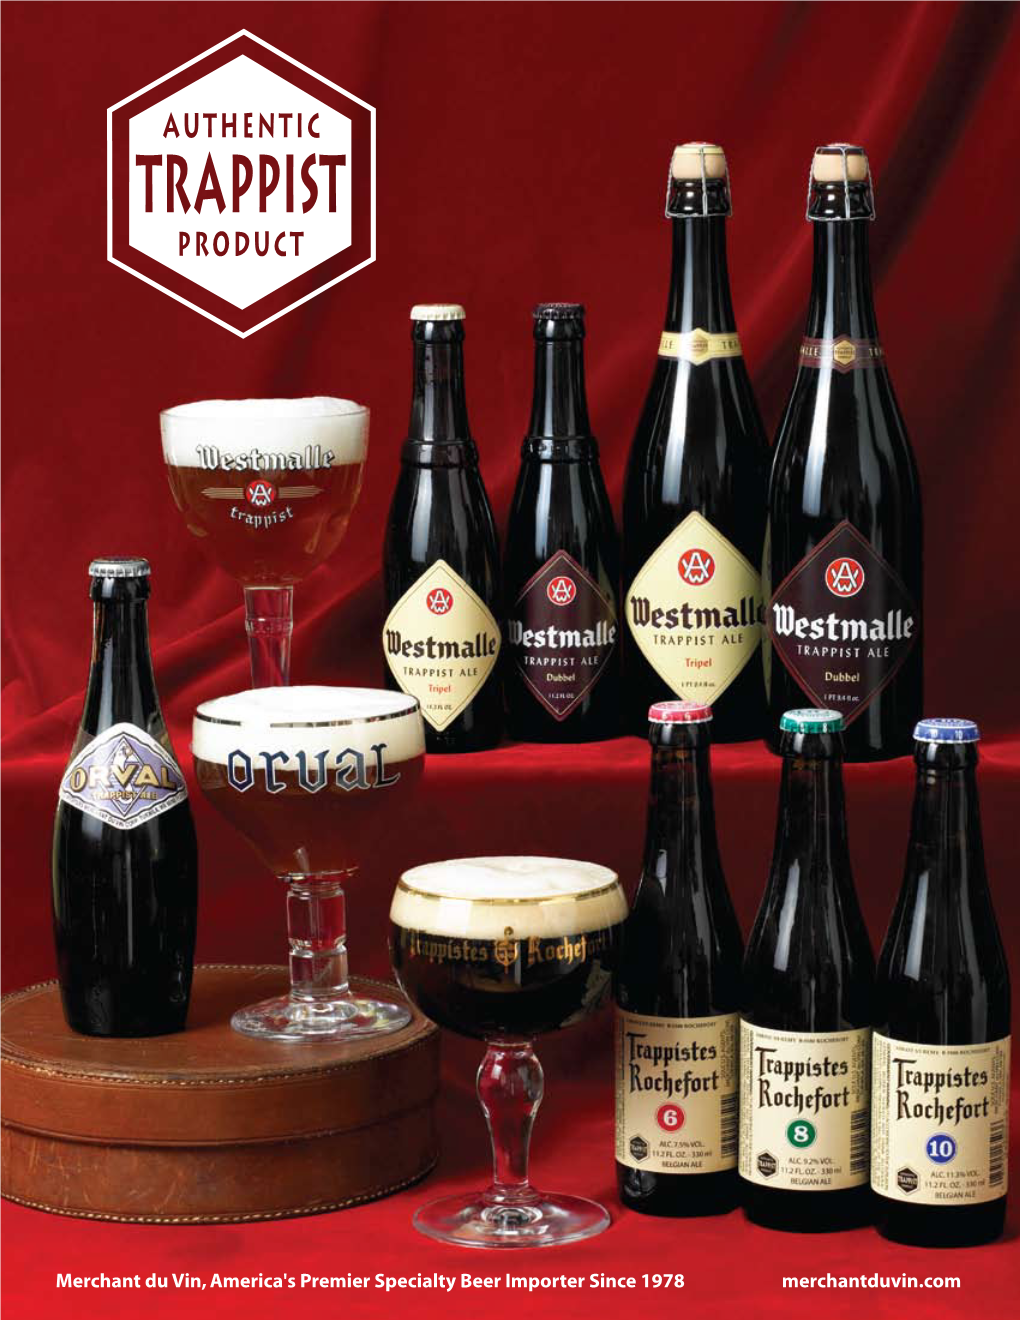 The Trappist Breweries of Merchant Du Vin Only Beers Made in a Trappist Monastery, Under the Supervision of the Monks, Can Use the Authentic Trappist Product Seal